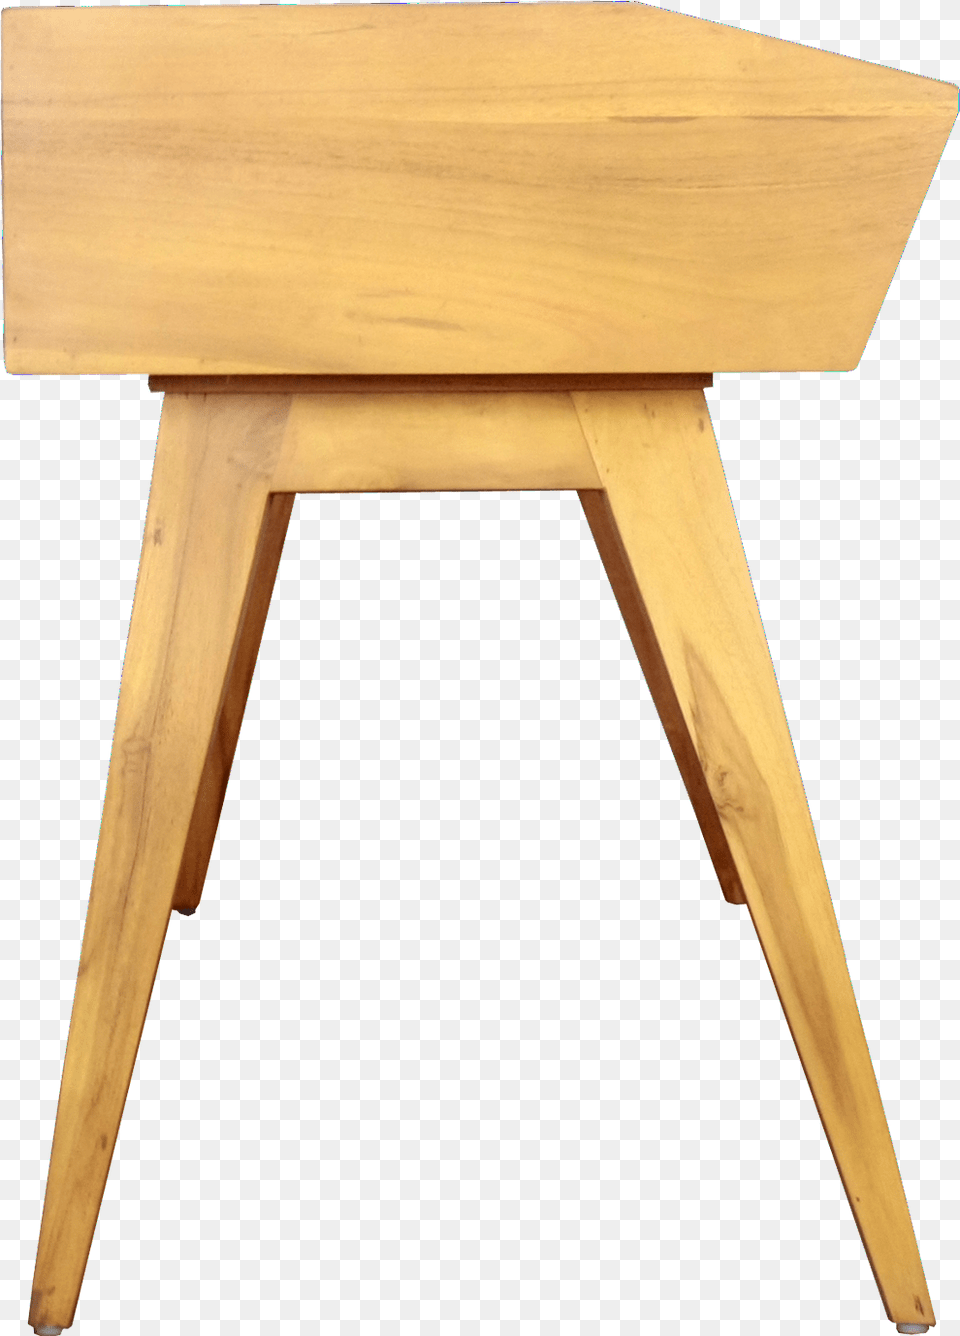 Kor Study Desk, Coffee Table, Table, Plywood, Furniture Free Transparent Png